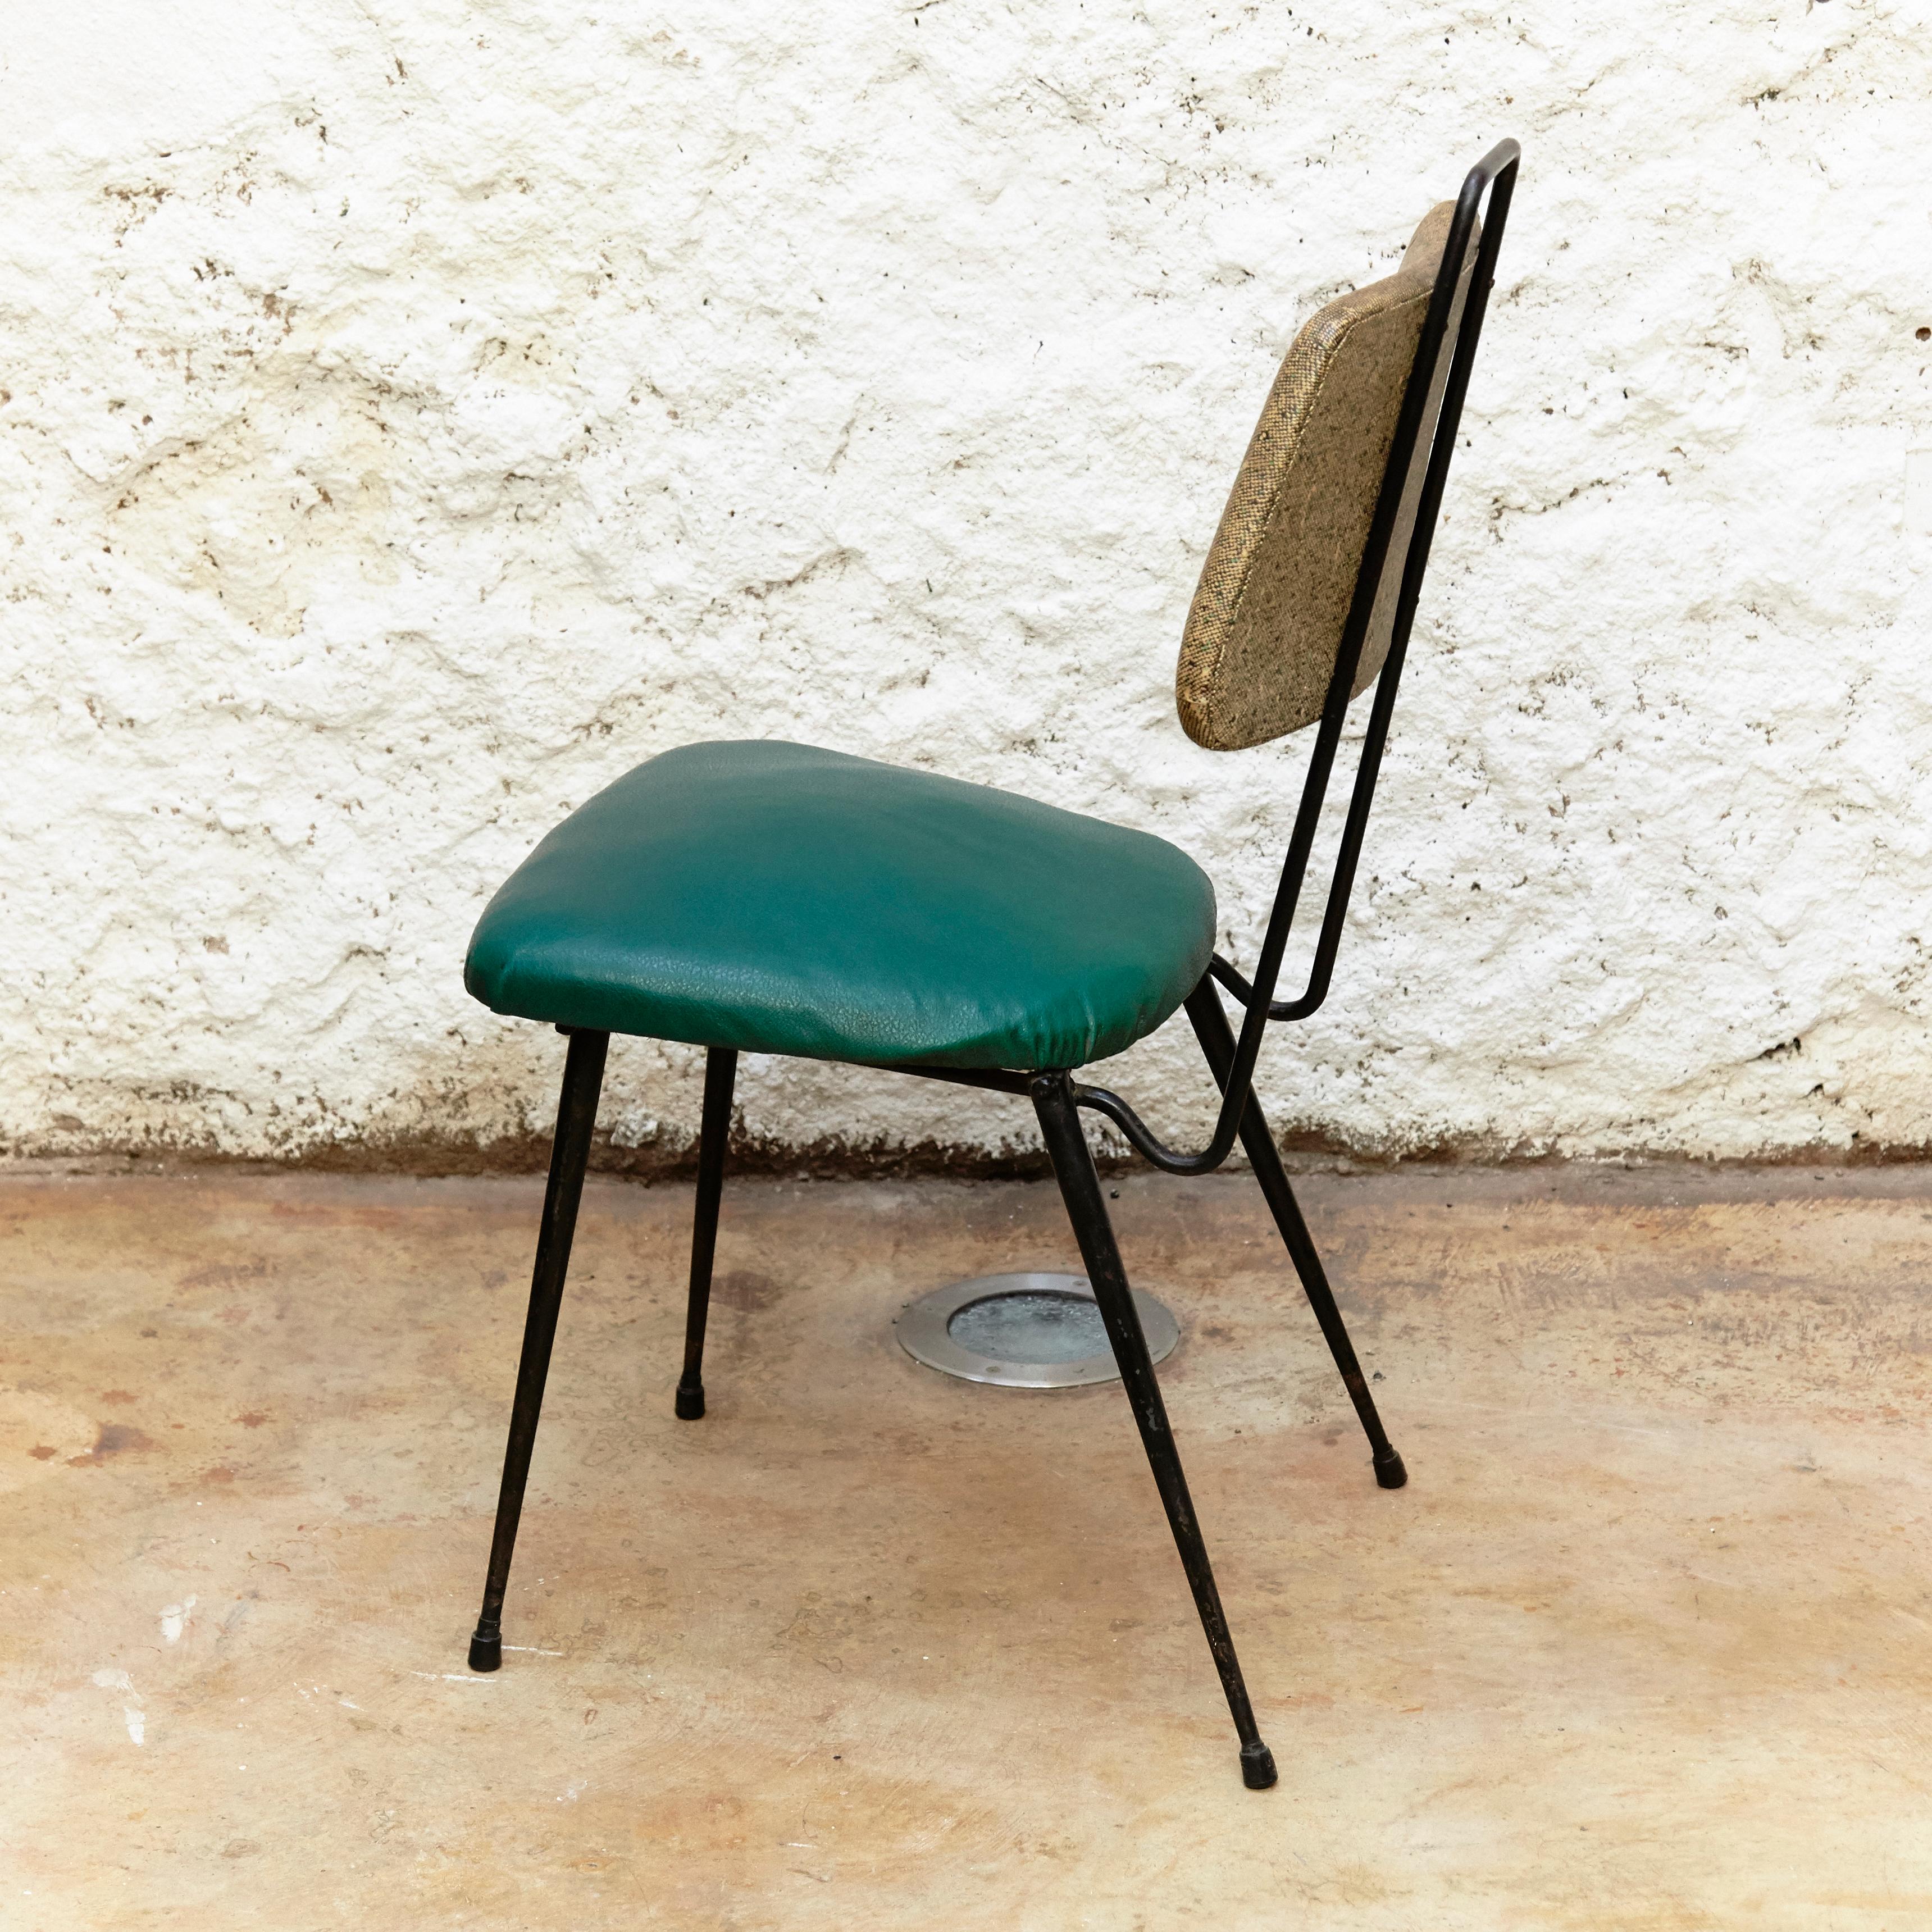 Spanish Hermanos Vidal Skie and Lacquered Metal Mid-Century Modern Chair, circa 1950